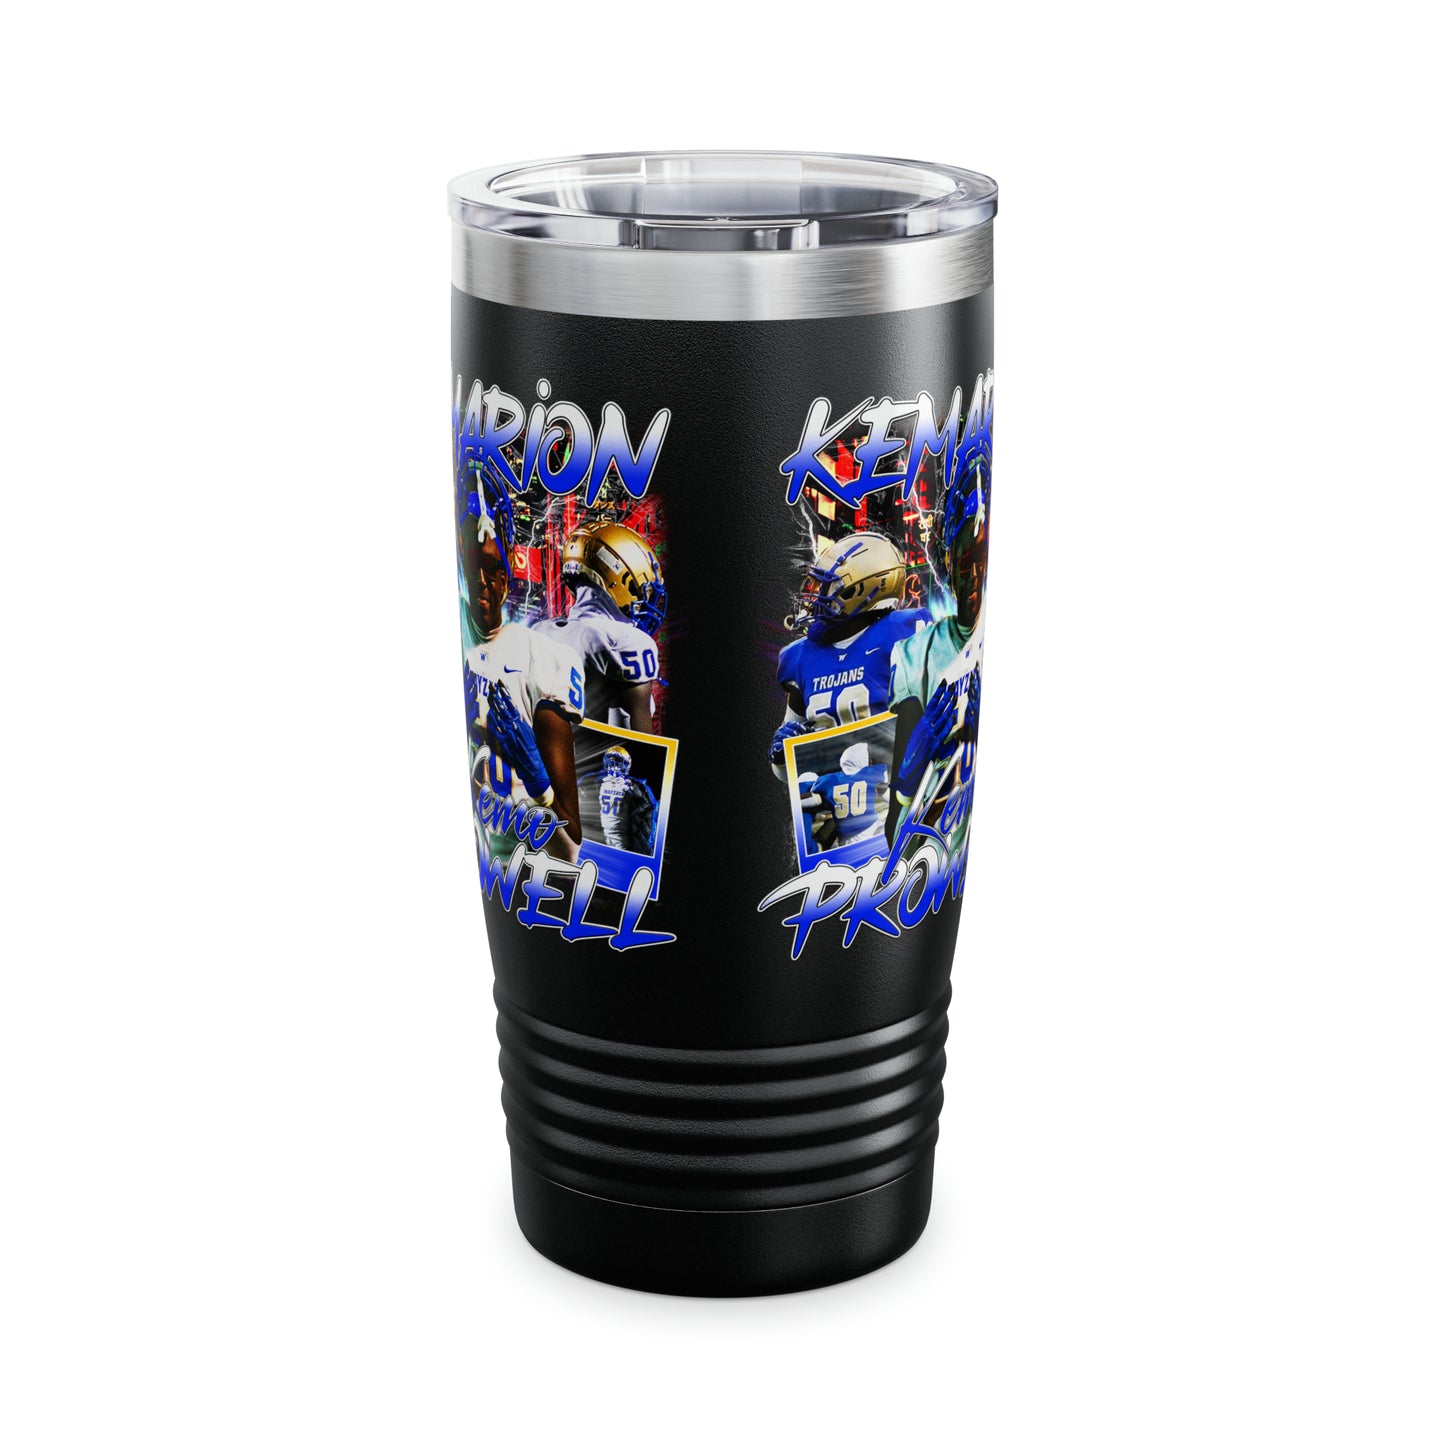 Kemarion Prowell Stainless Steel Tumbler